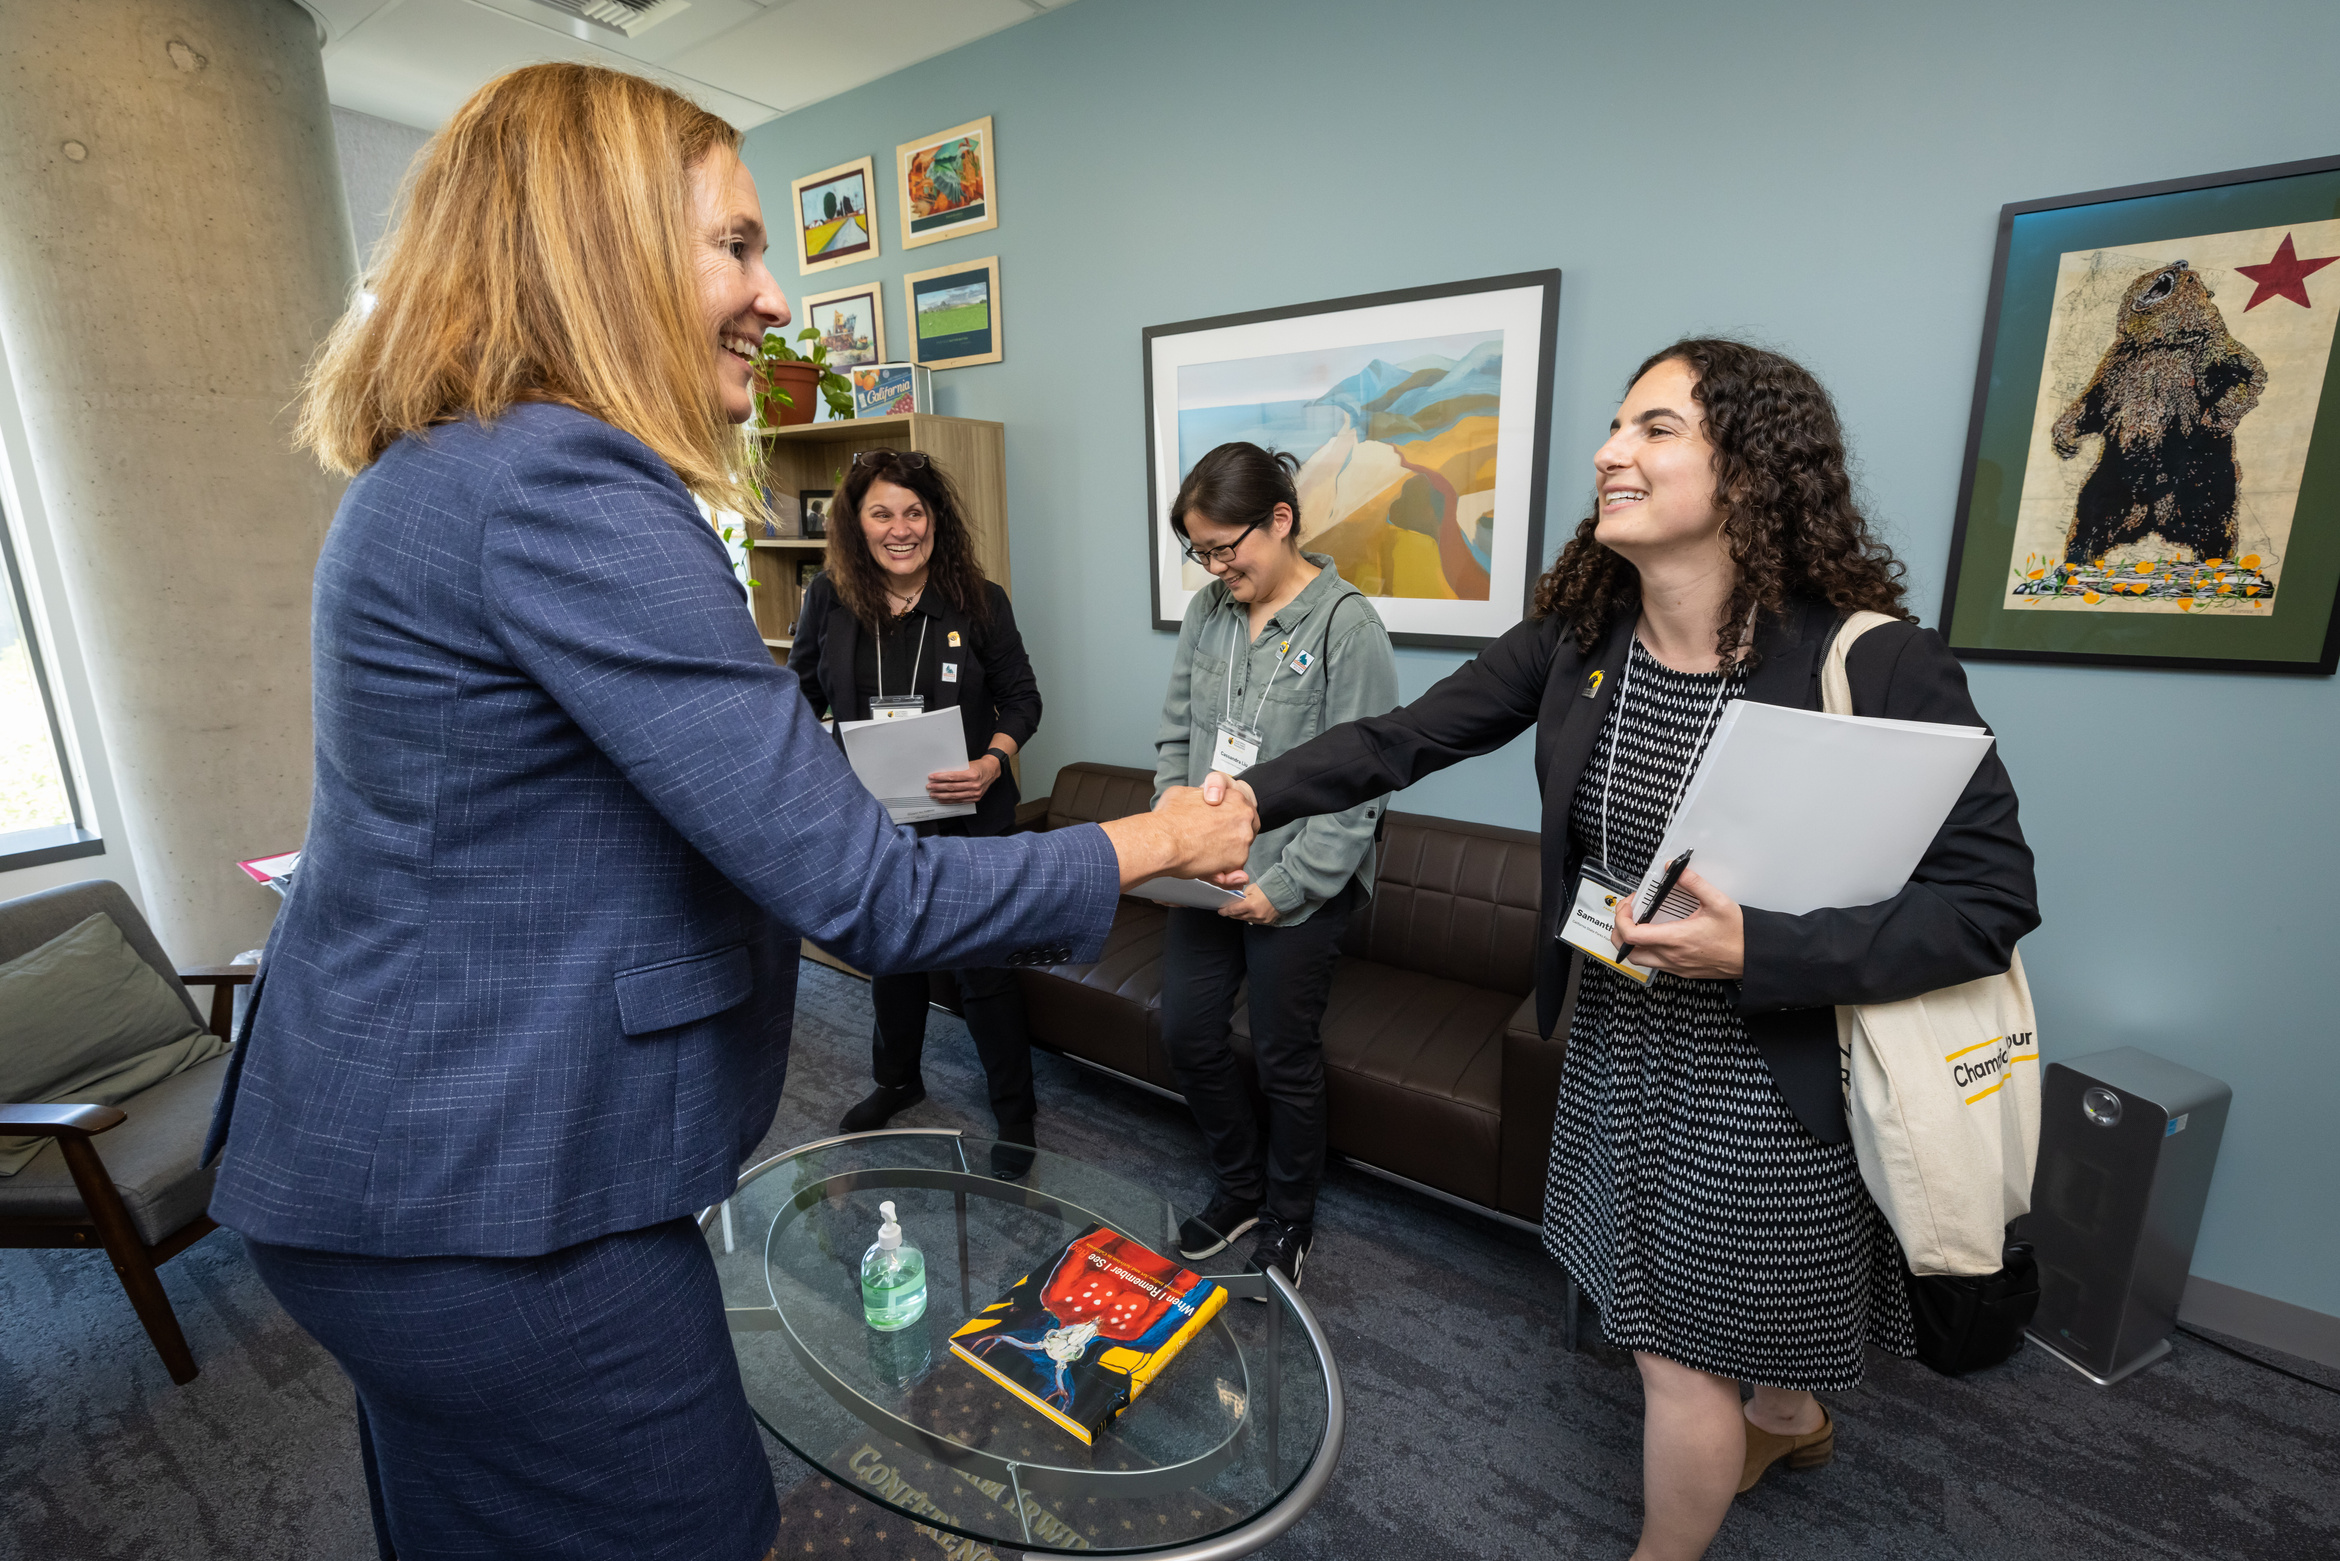 Assemblymember Jacqui Irwin shakes hands with California State Parks Foundation staff member Samantha Joseph in a meeting in her office at Park Advocacy Day. Two other people stand in the background of the meeting laughing.